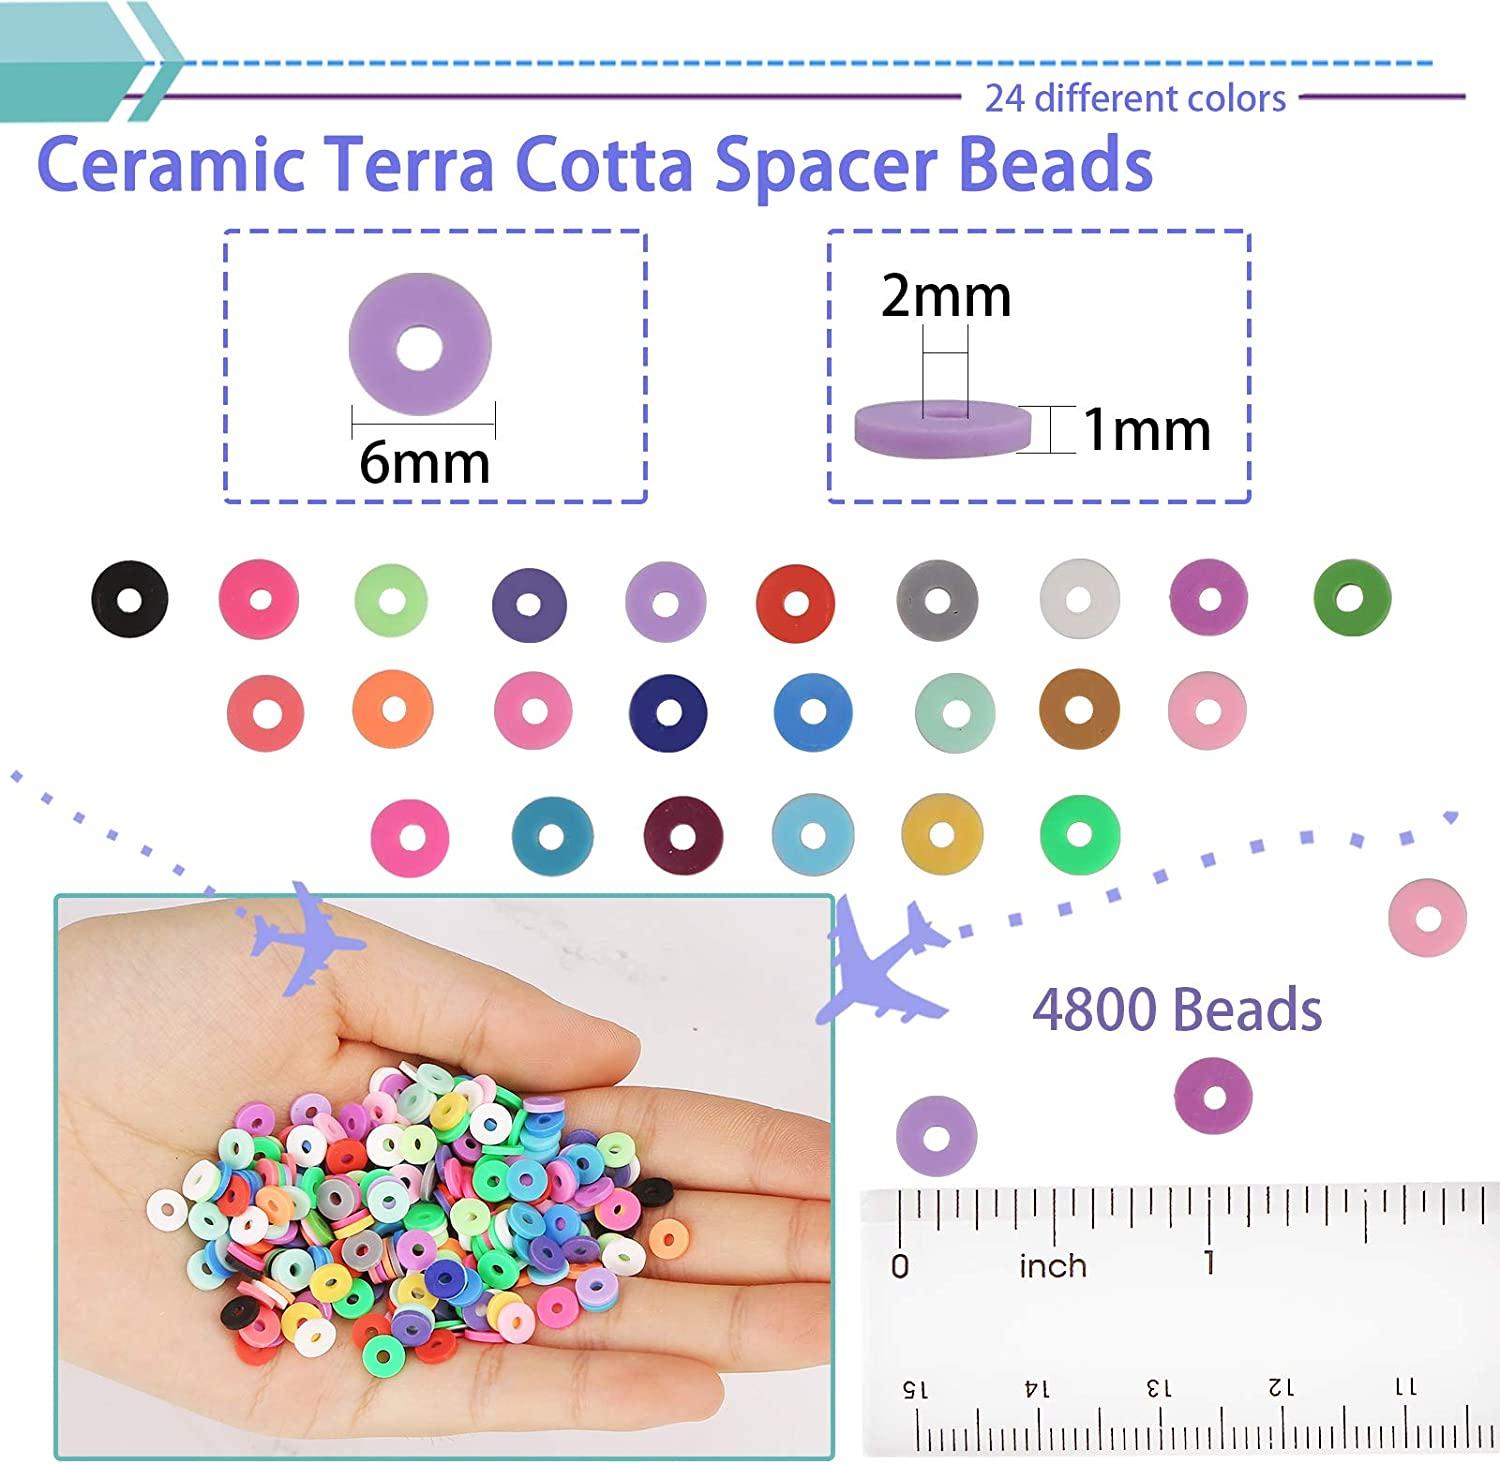 TOOKEMITOP 2000pcs White Clay Beads with String - Friendship Bracelet Beads 6mm Heishi Polymer Spacer Flat Beads DIY for Jewelry Necklace Earring Making Kit